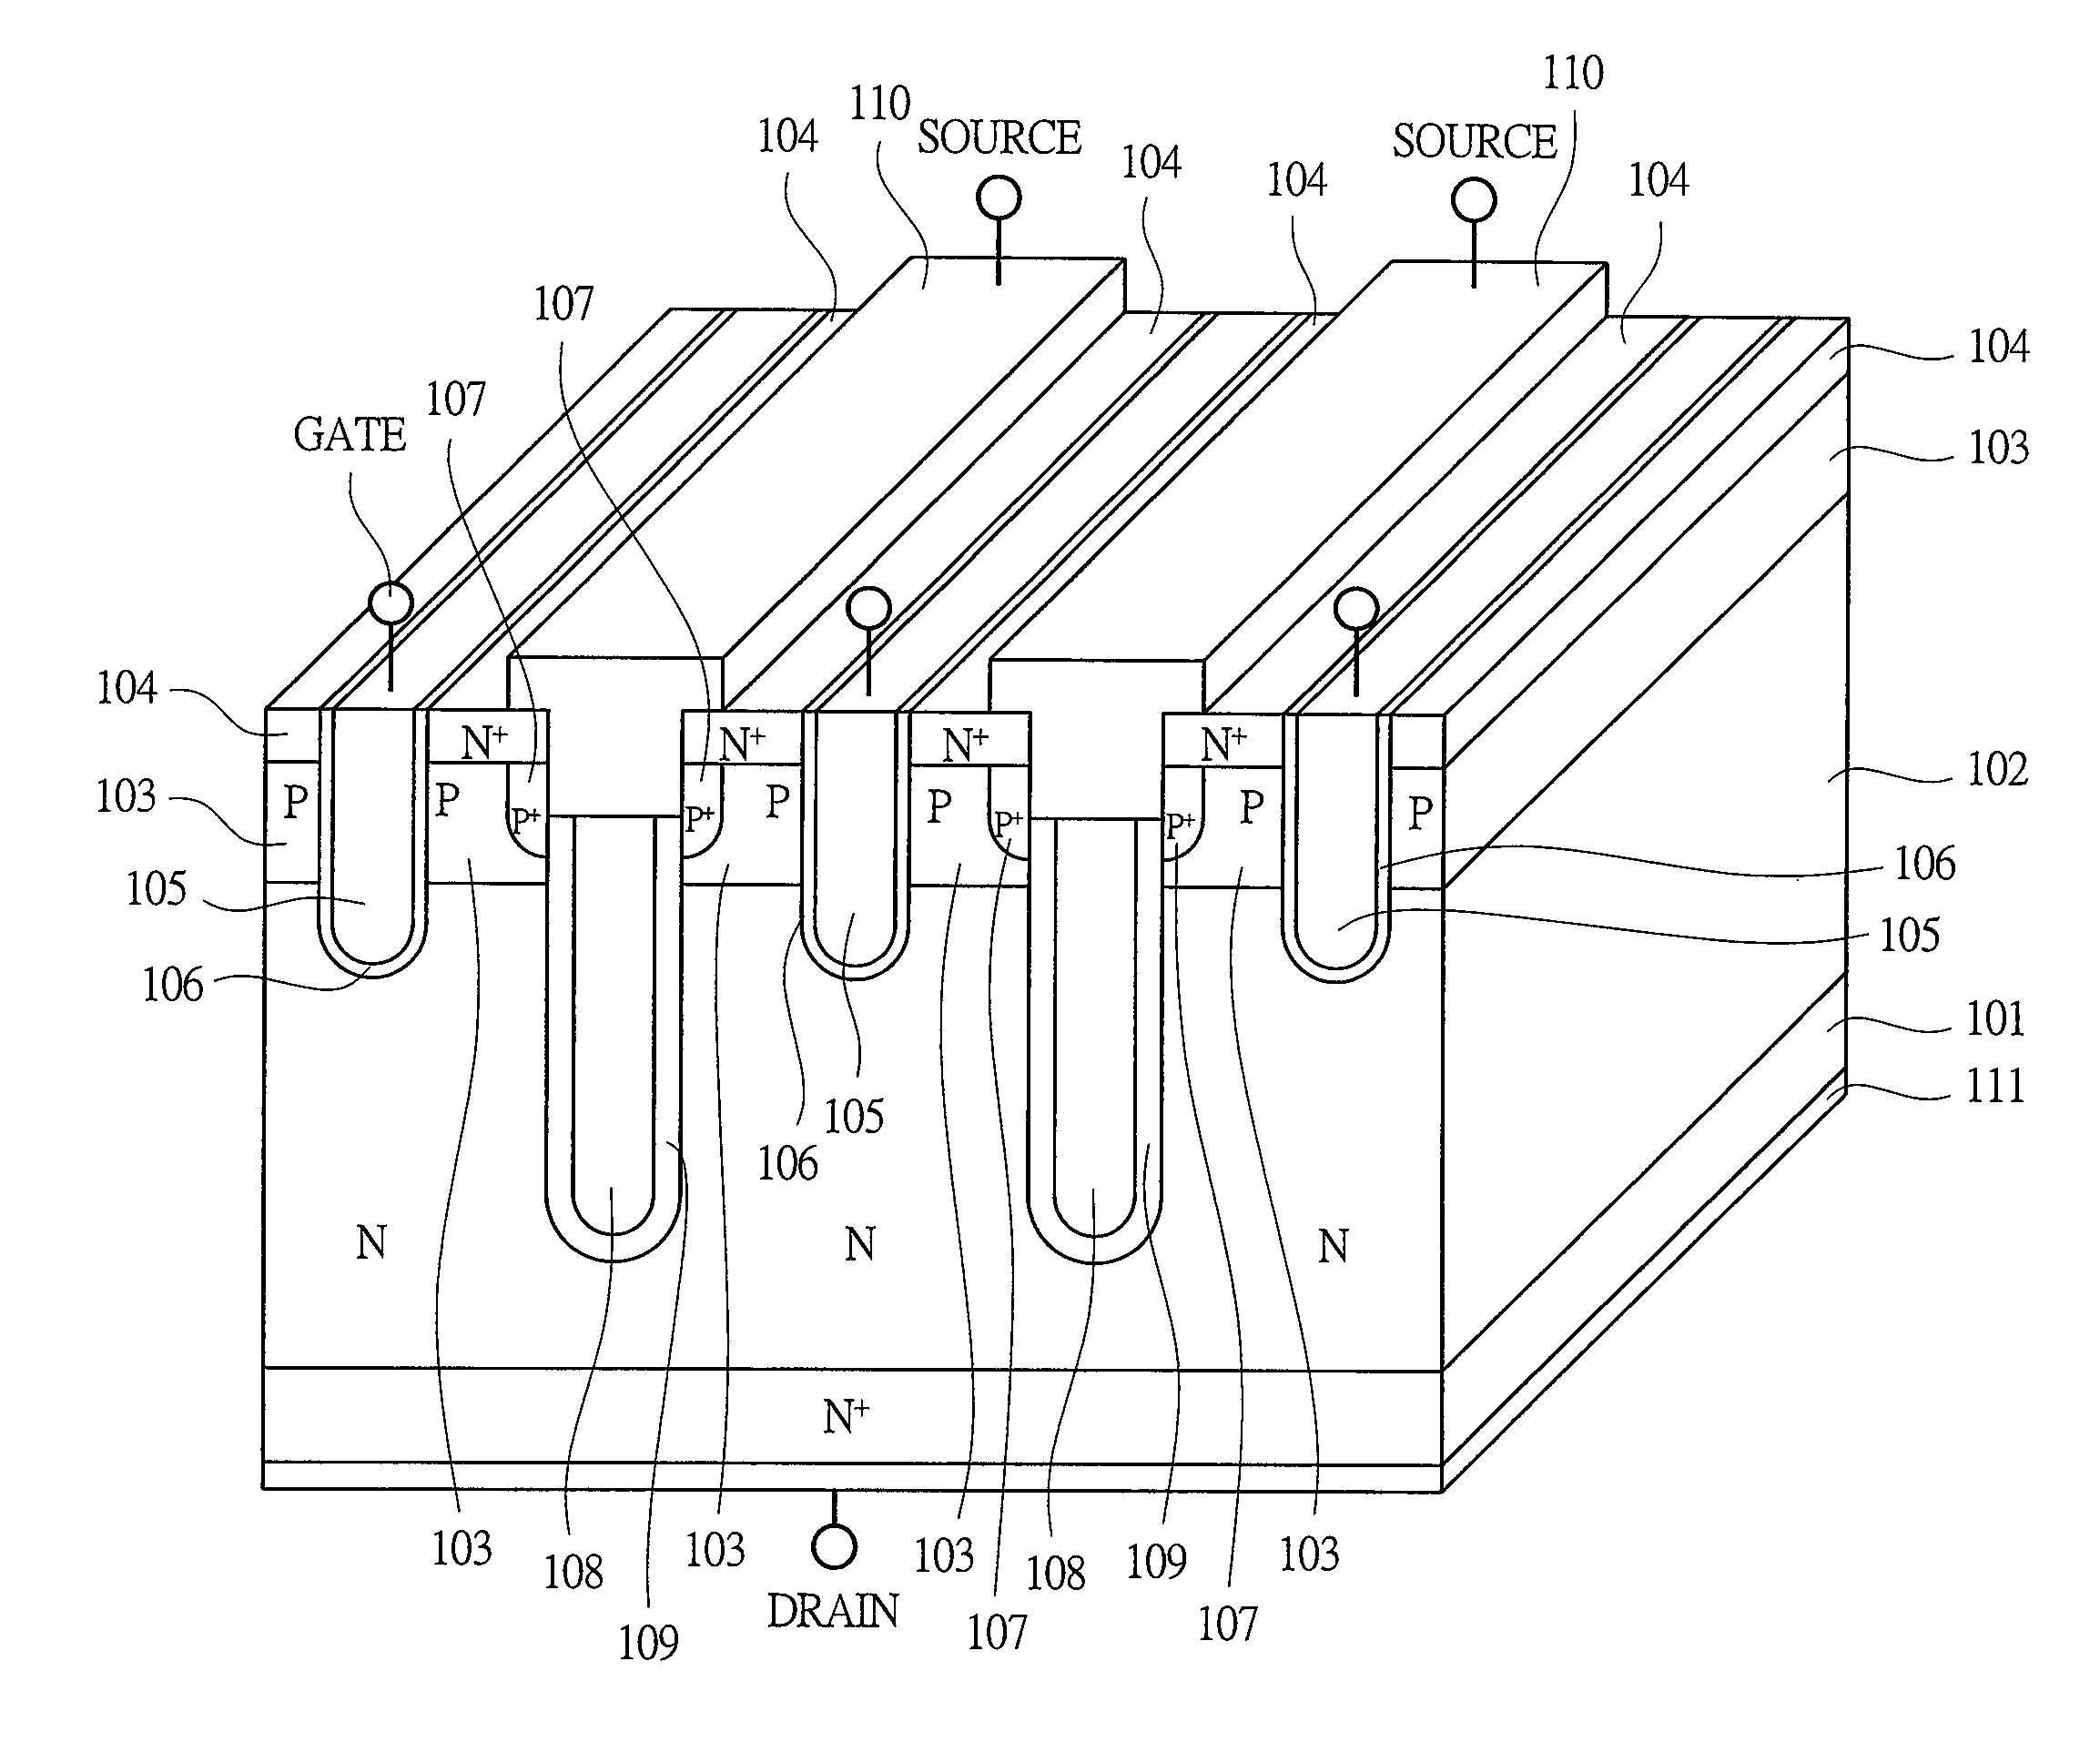 Semiconductor device with vertical trench and lightly doped region